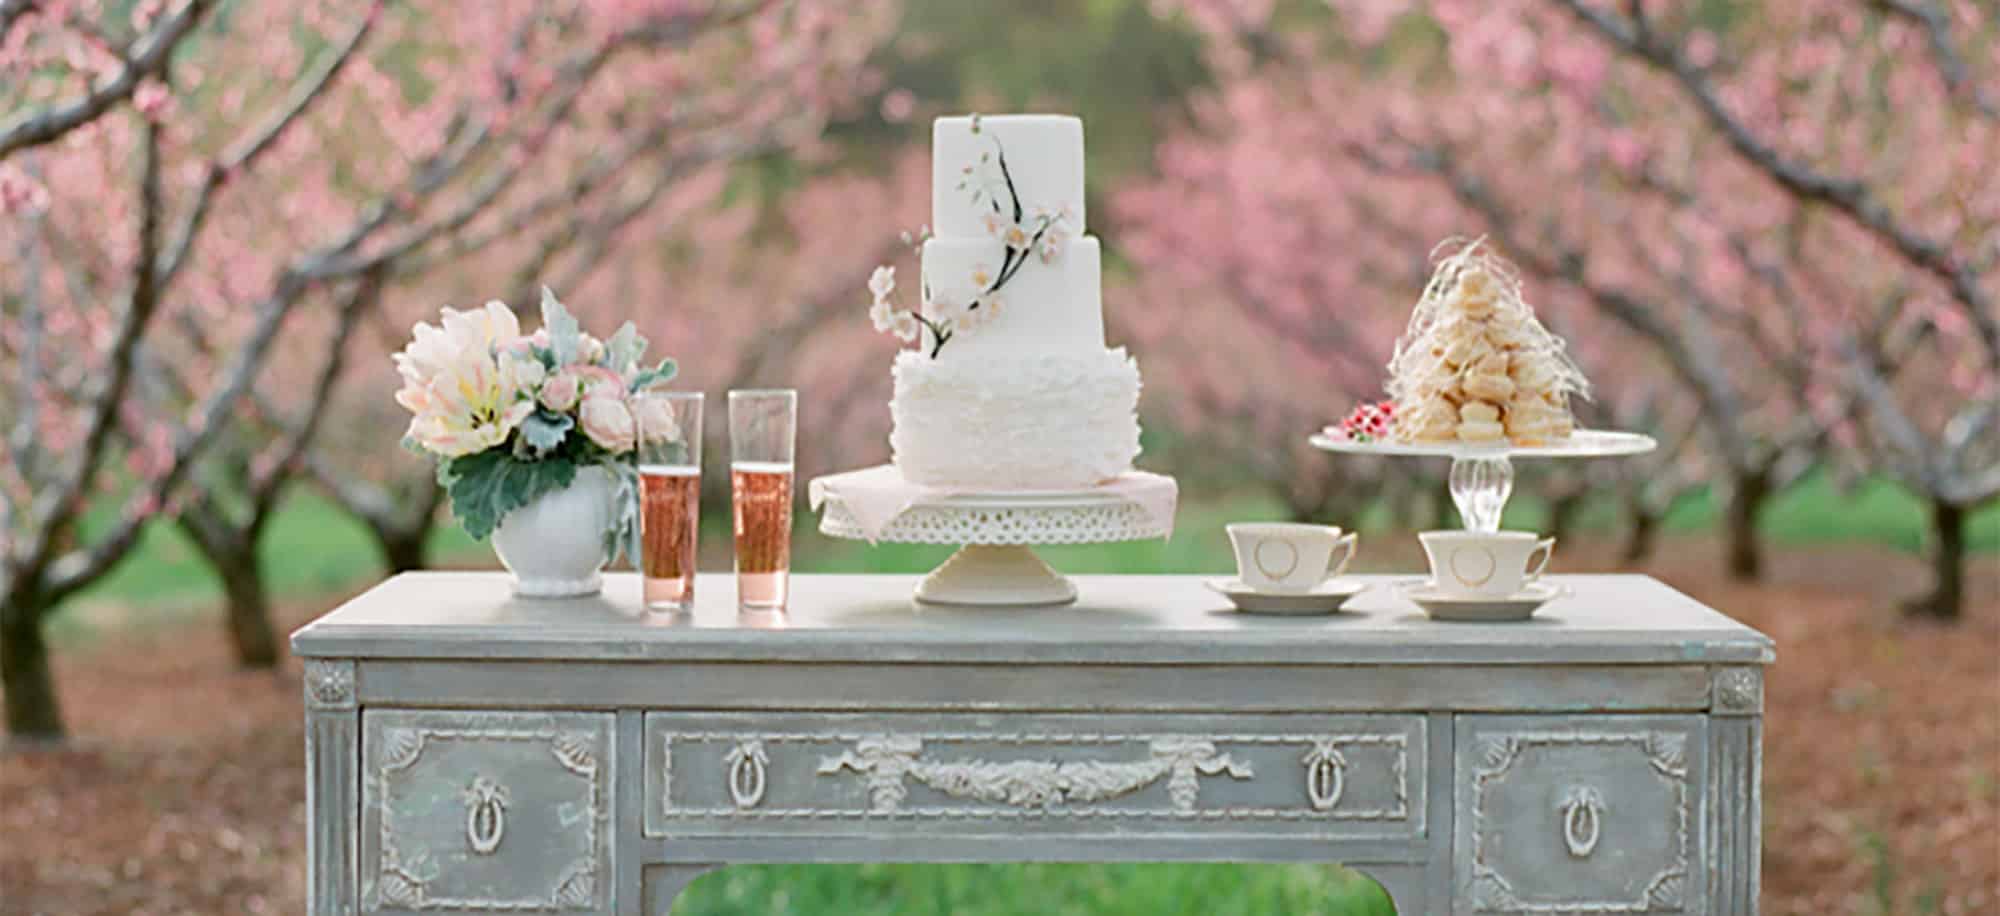 Stunning Wedding Cakes - Their Traditions History and Symbolism​